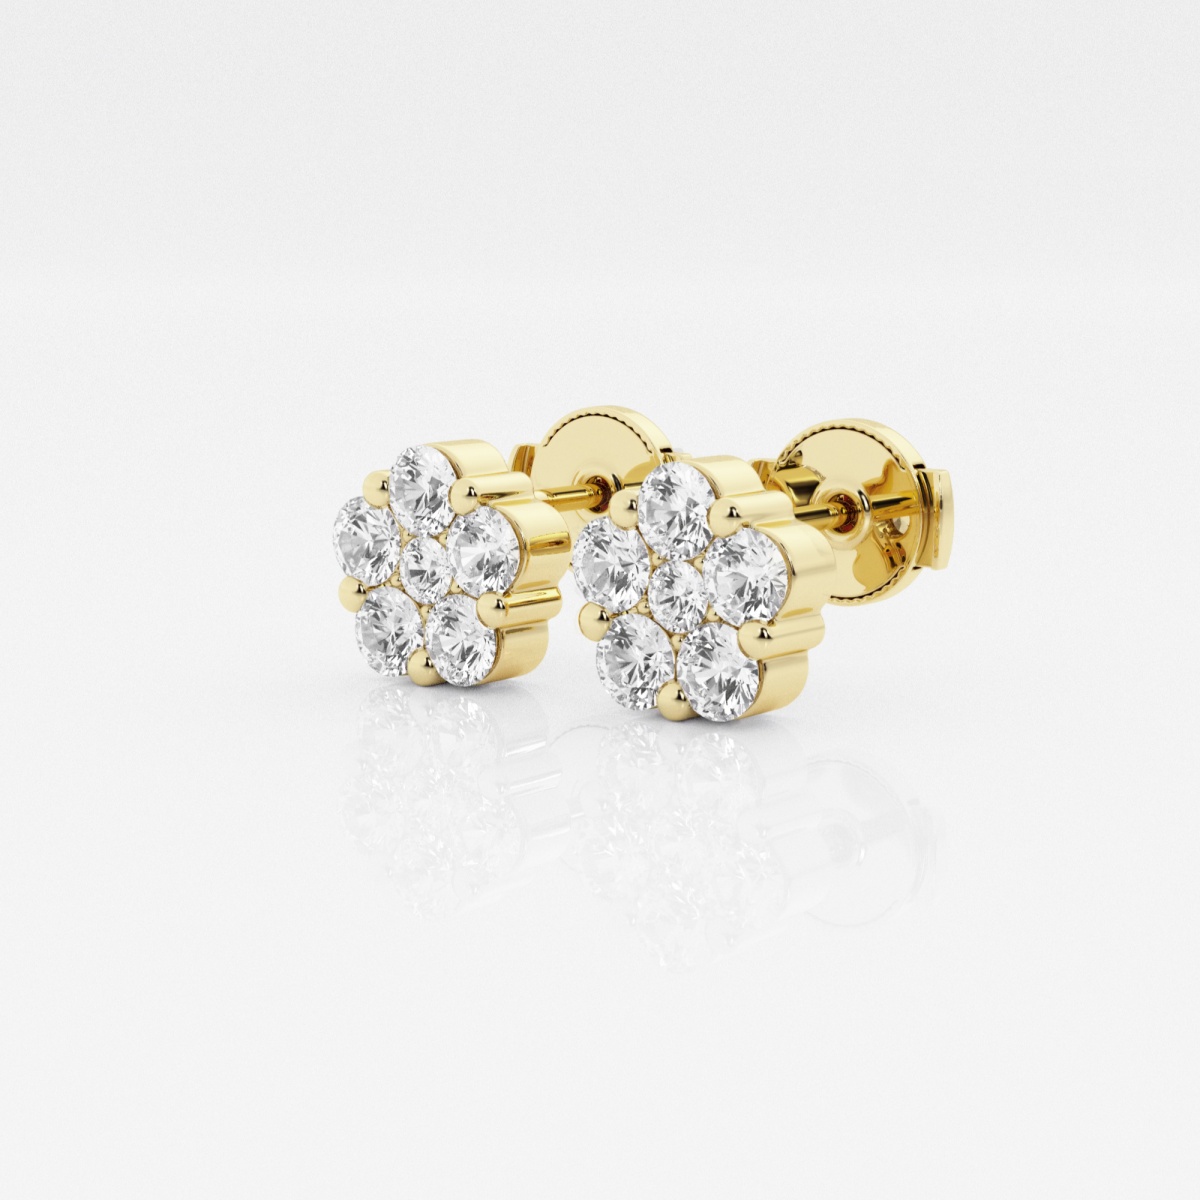 Additional Image 1 for  1 ctw Round Lab Grown Diamond Flower Stud Earrings